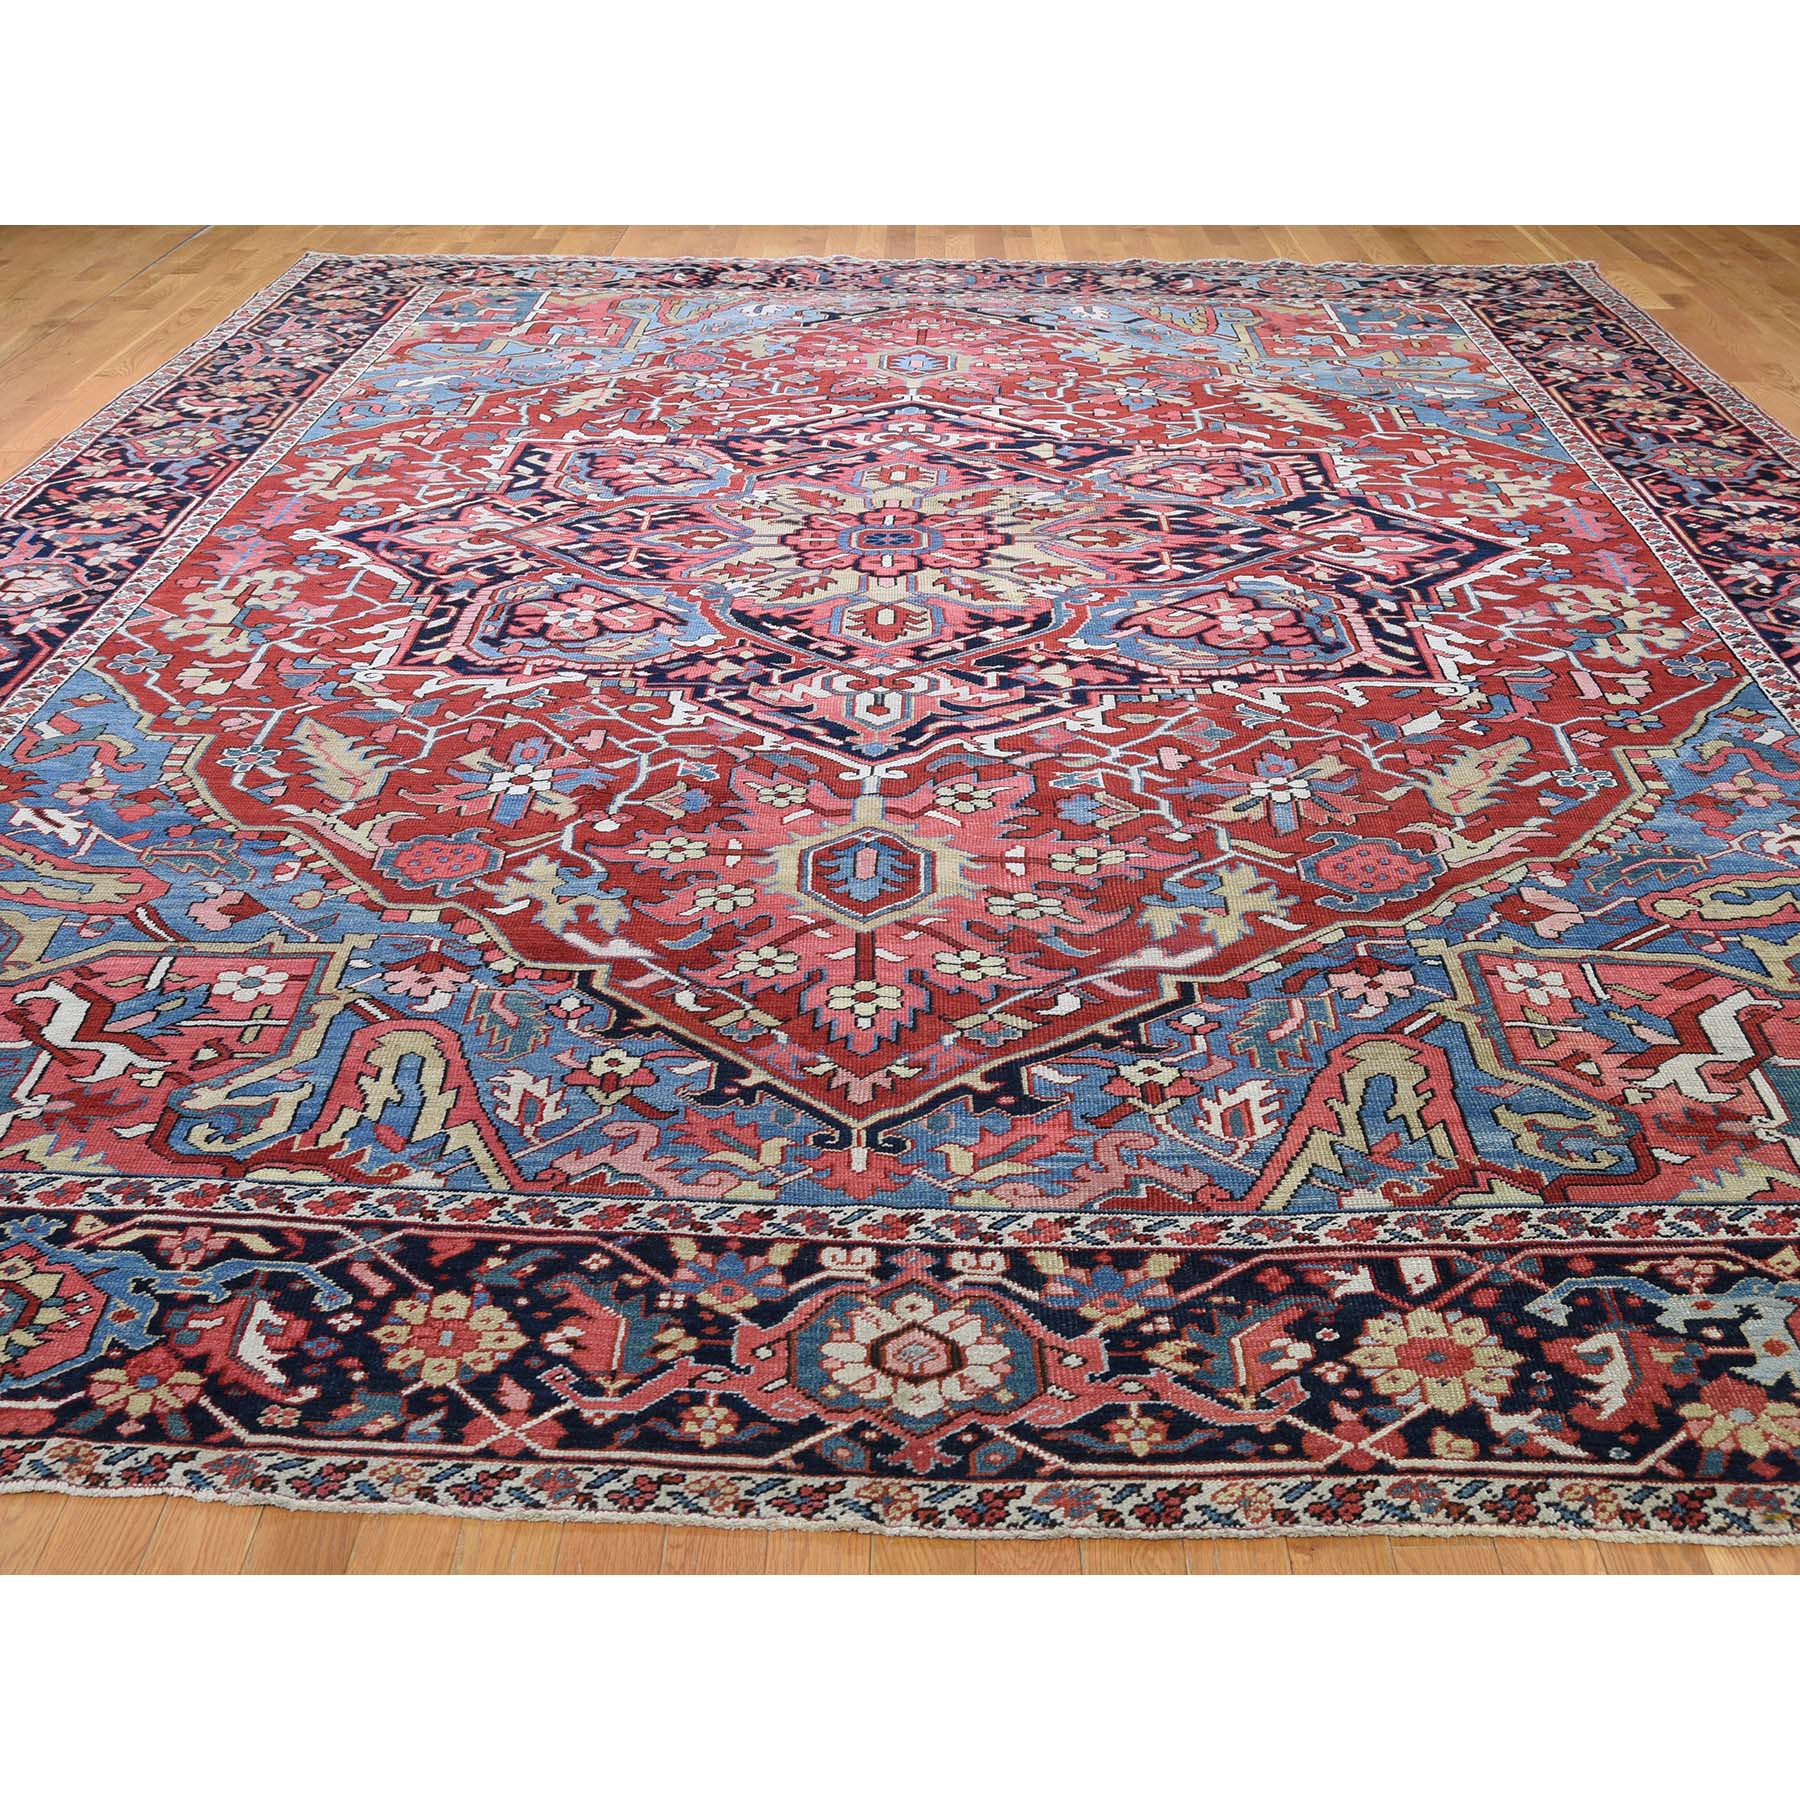 11-7 x14-9  Antique  Persian Heriz Pure Wool Exc Condition Hand-Knotted Fine Oriental Rug 